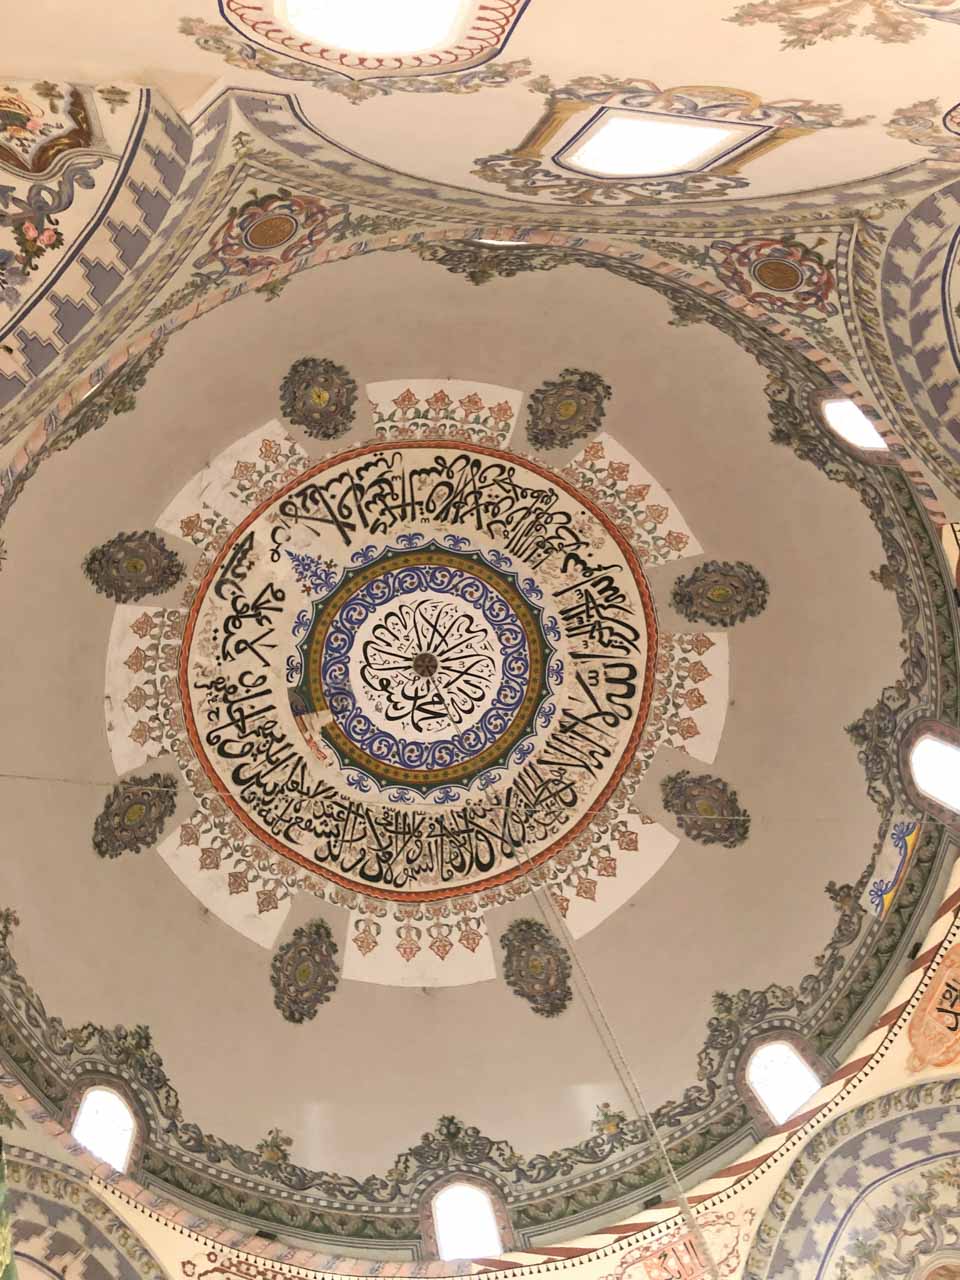 Painted dome inside the Sinan Pasha Mosque in Prizren, Kosovo